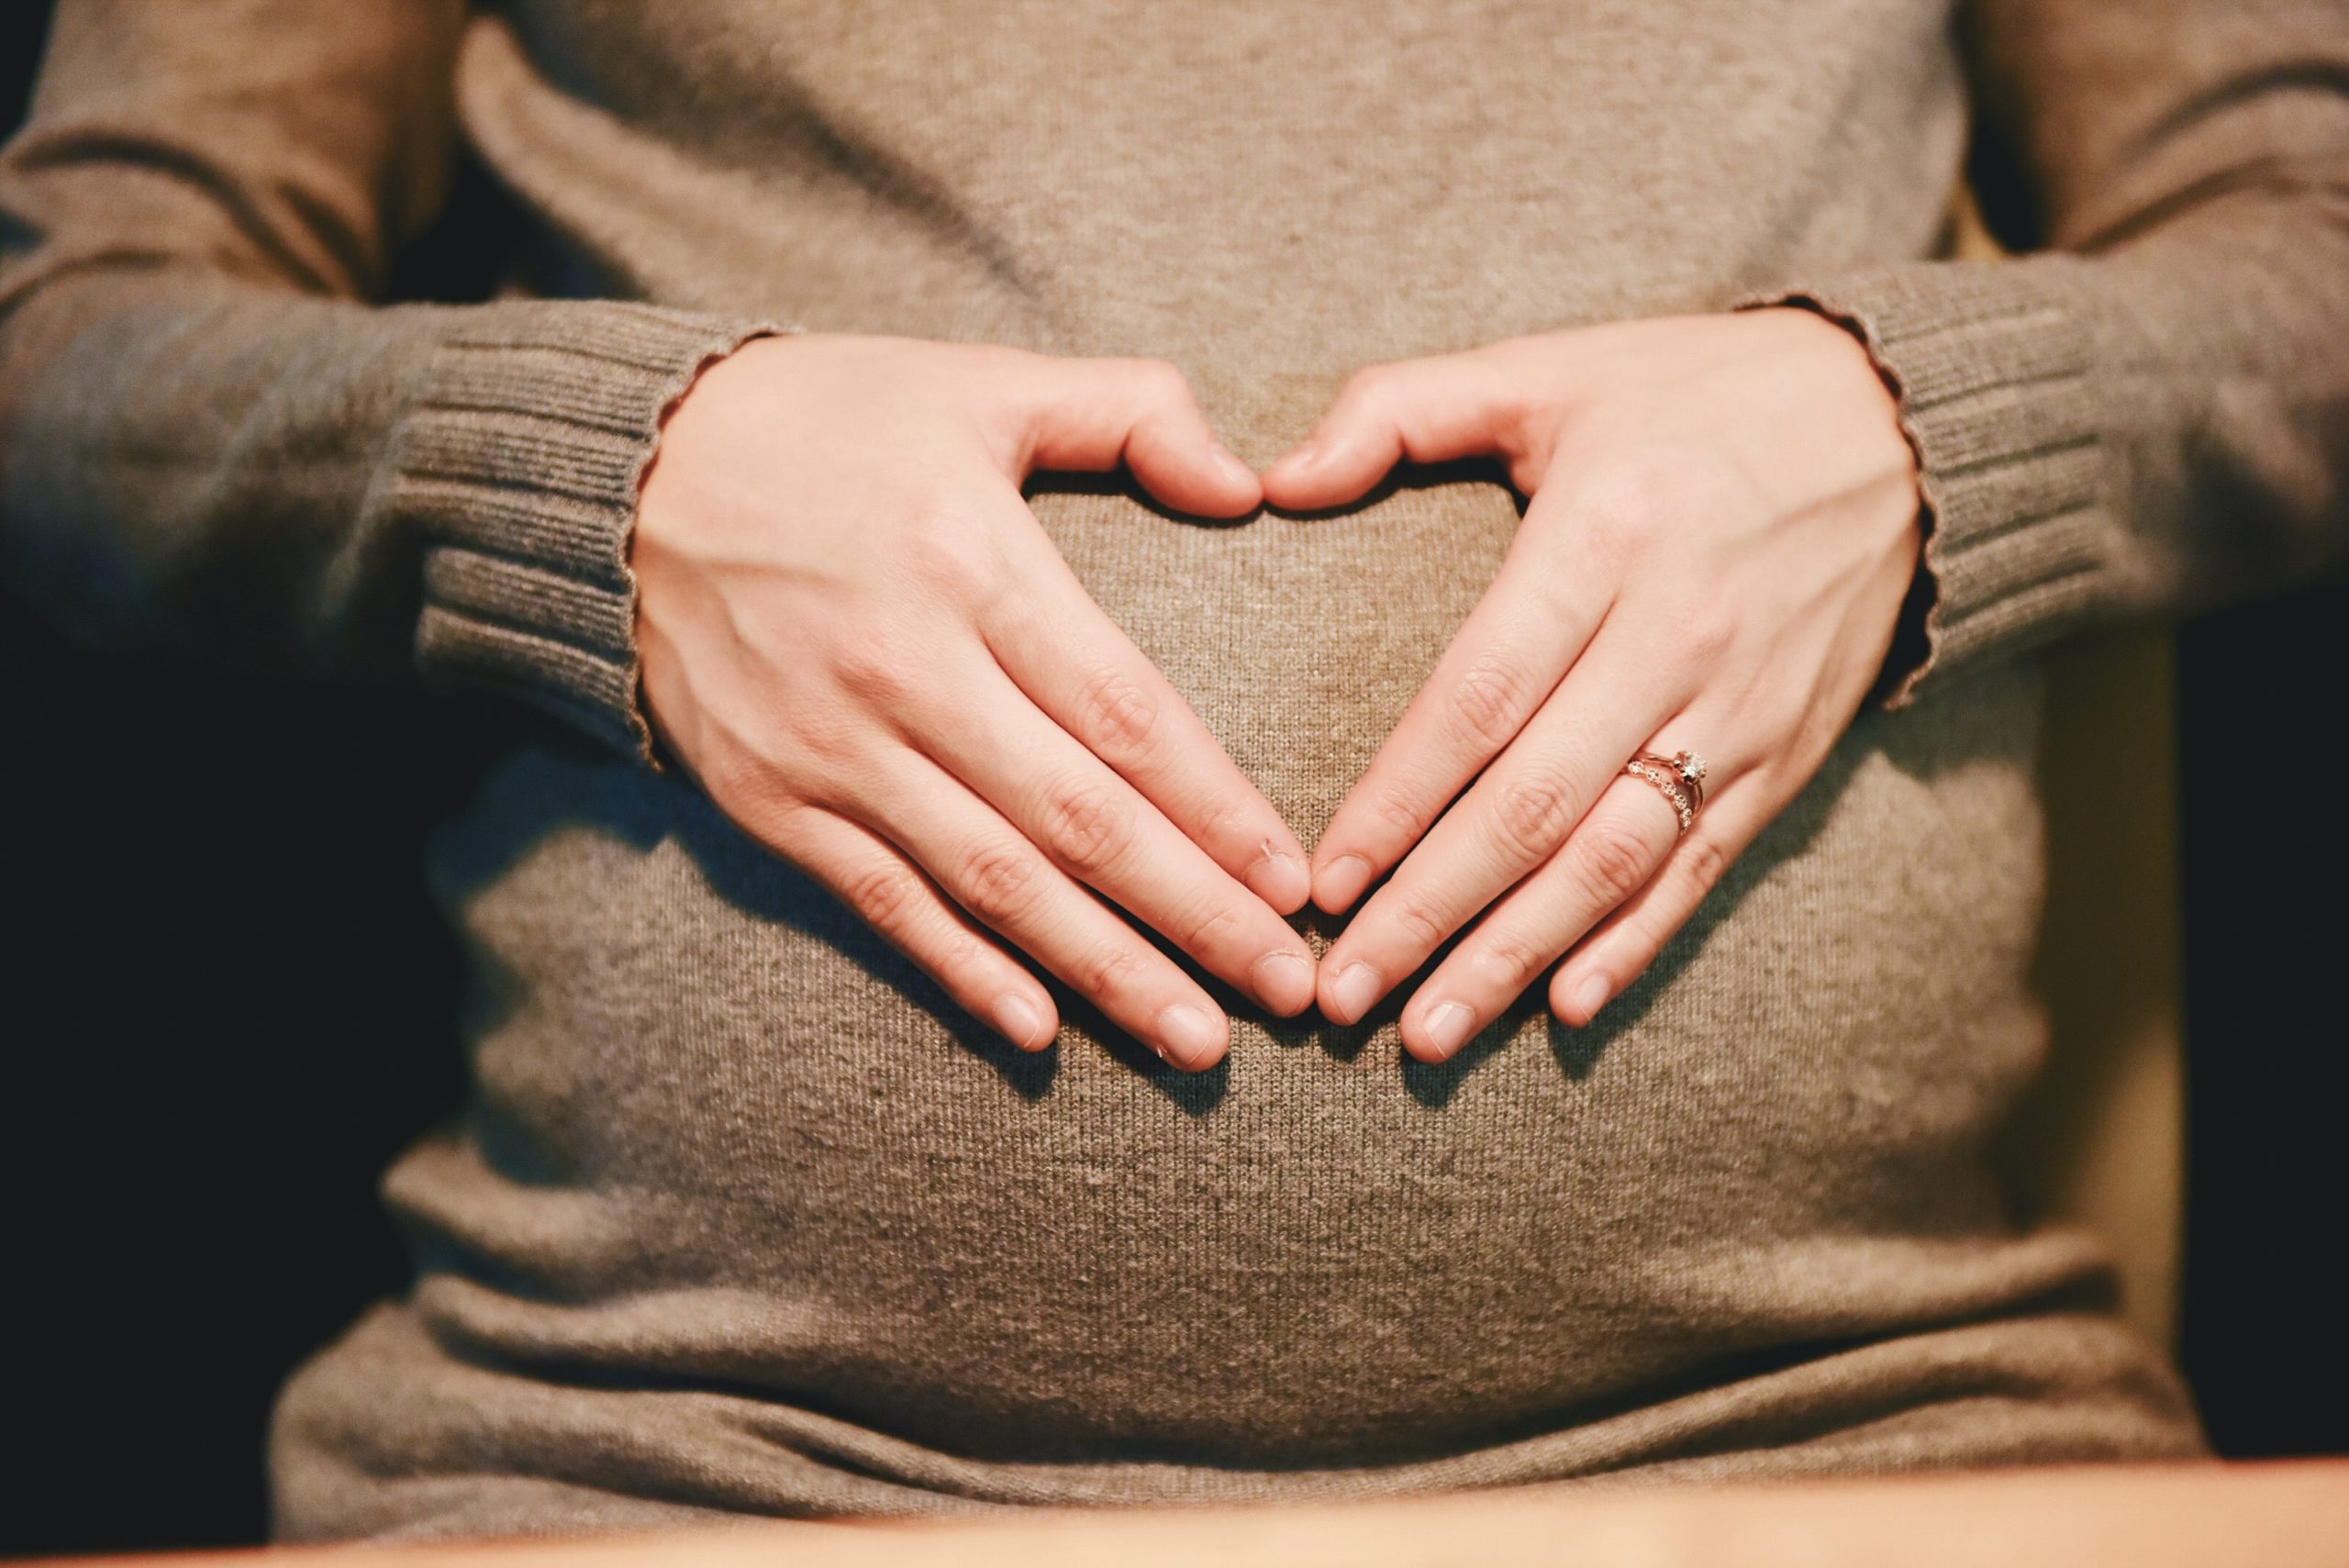 Pro-life bible verses: woman's hands cover her pregnant belly in the shape of a heart